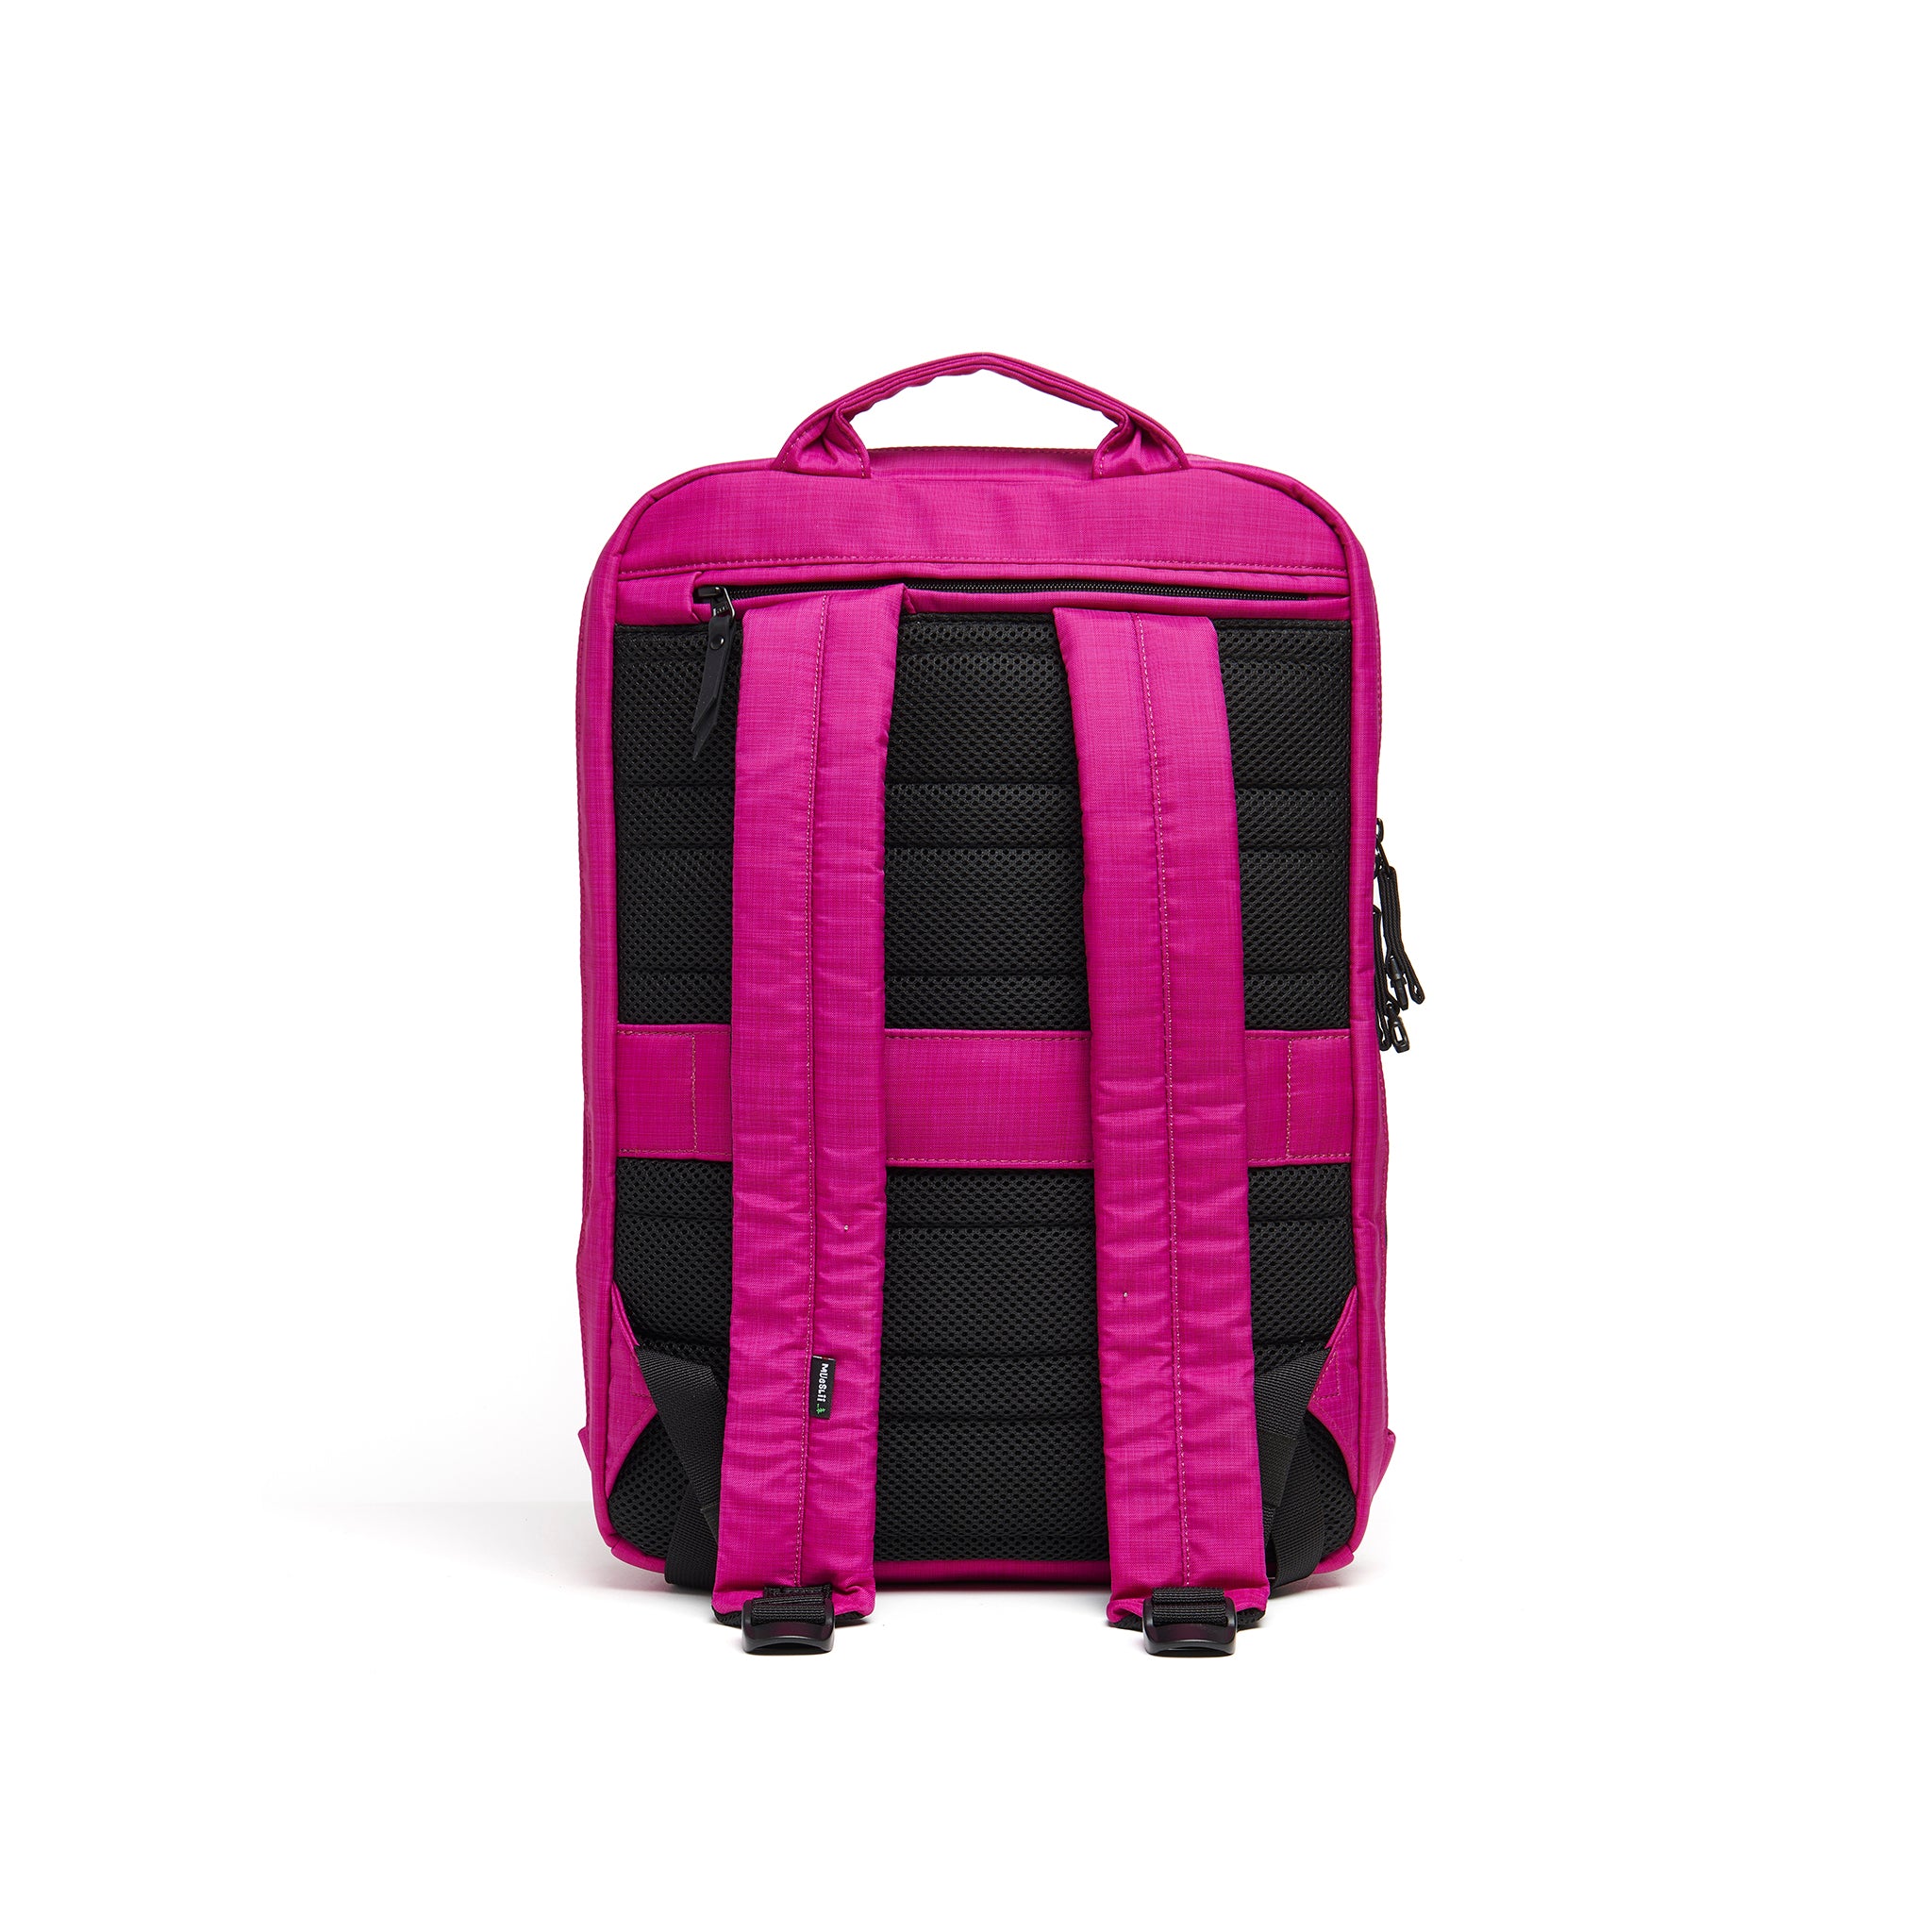 Mueslii daily backpack, made of  water resistant canvas nylon, with a laptop compartment, color fuchsia, back view.